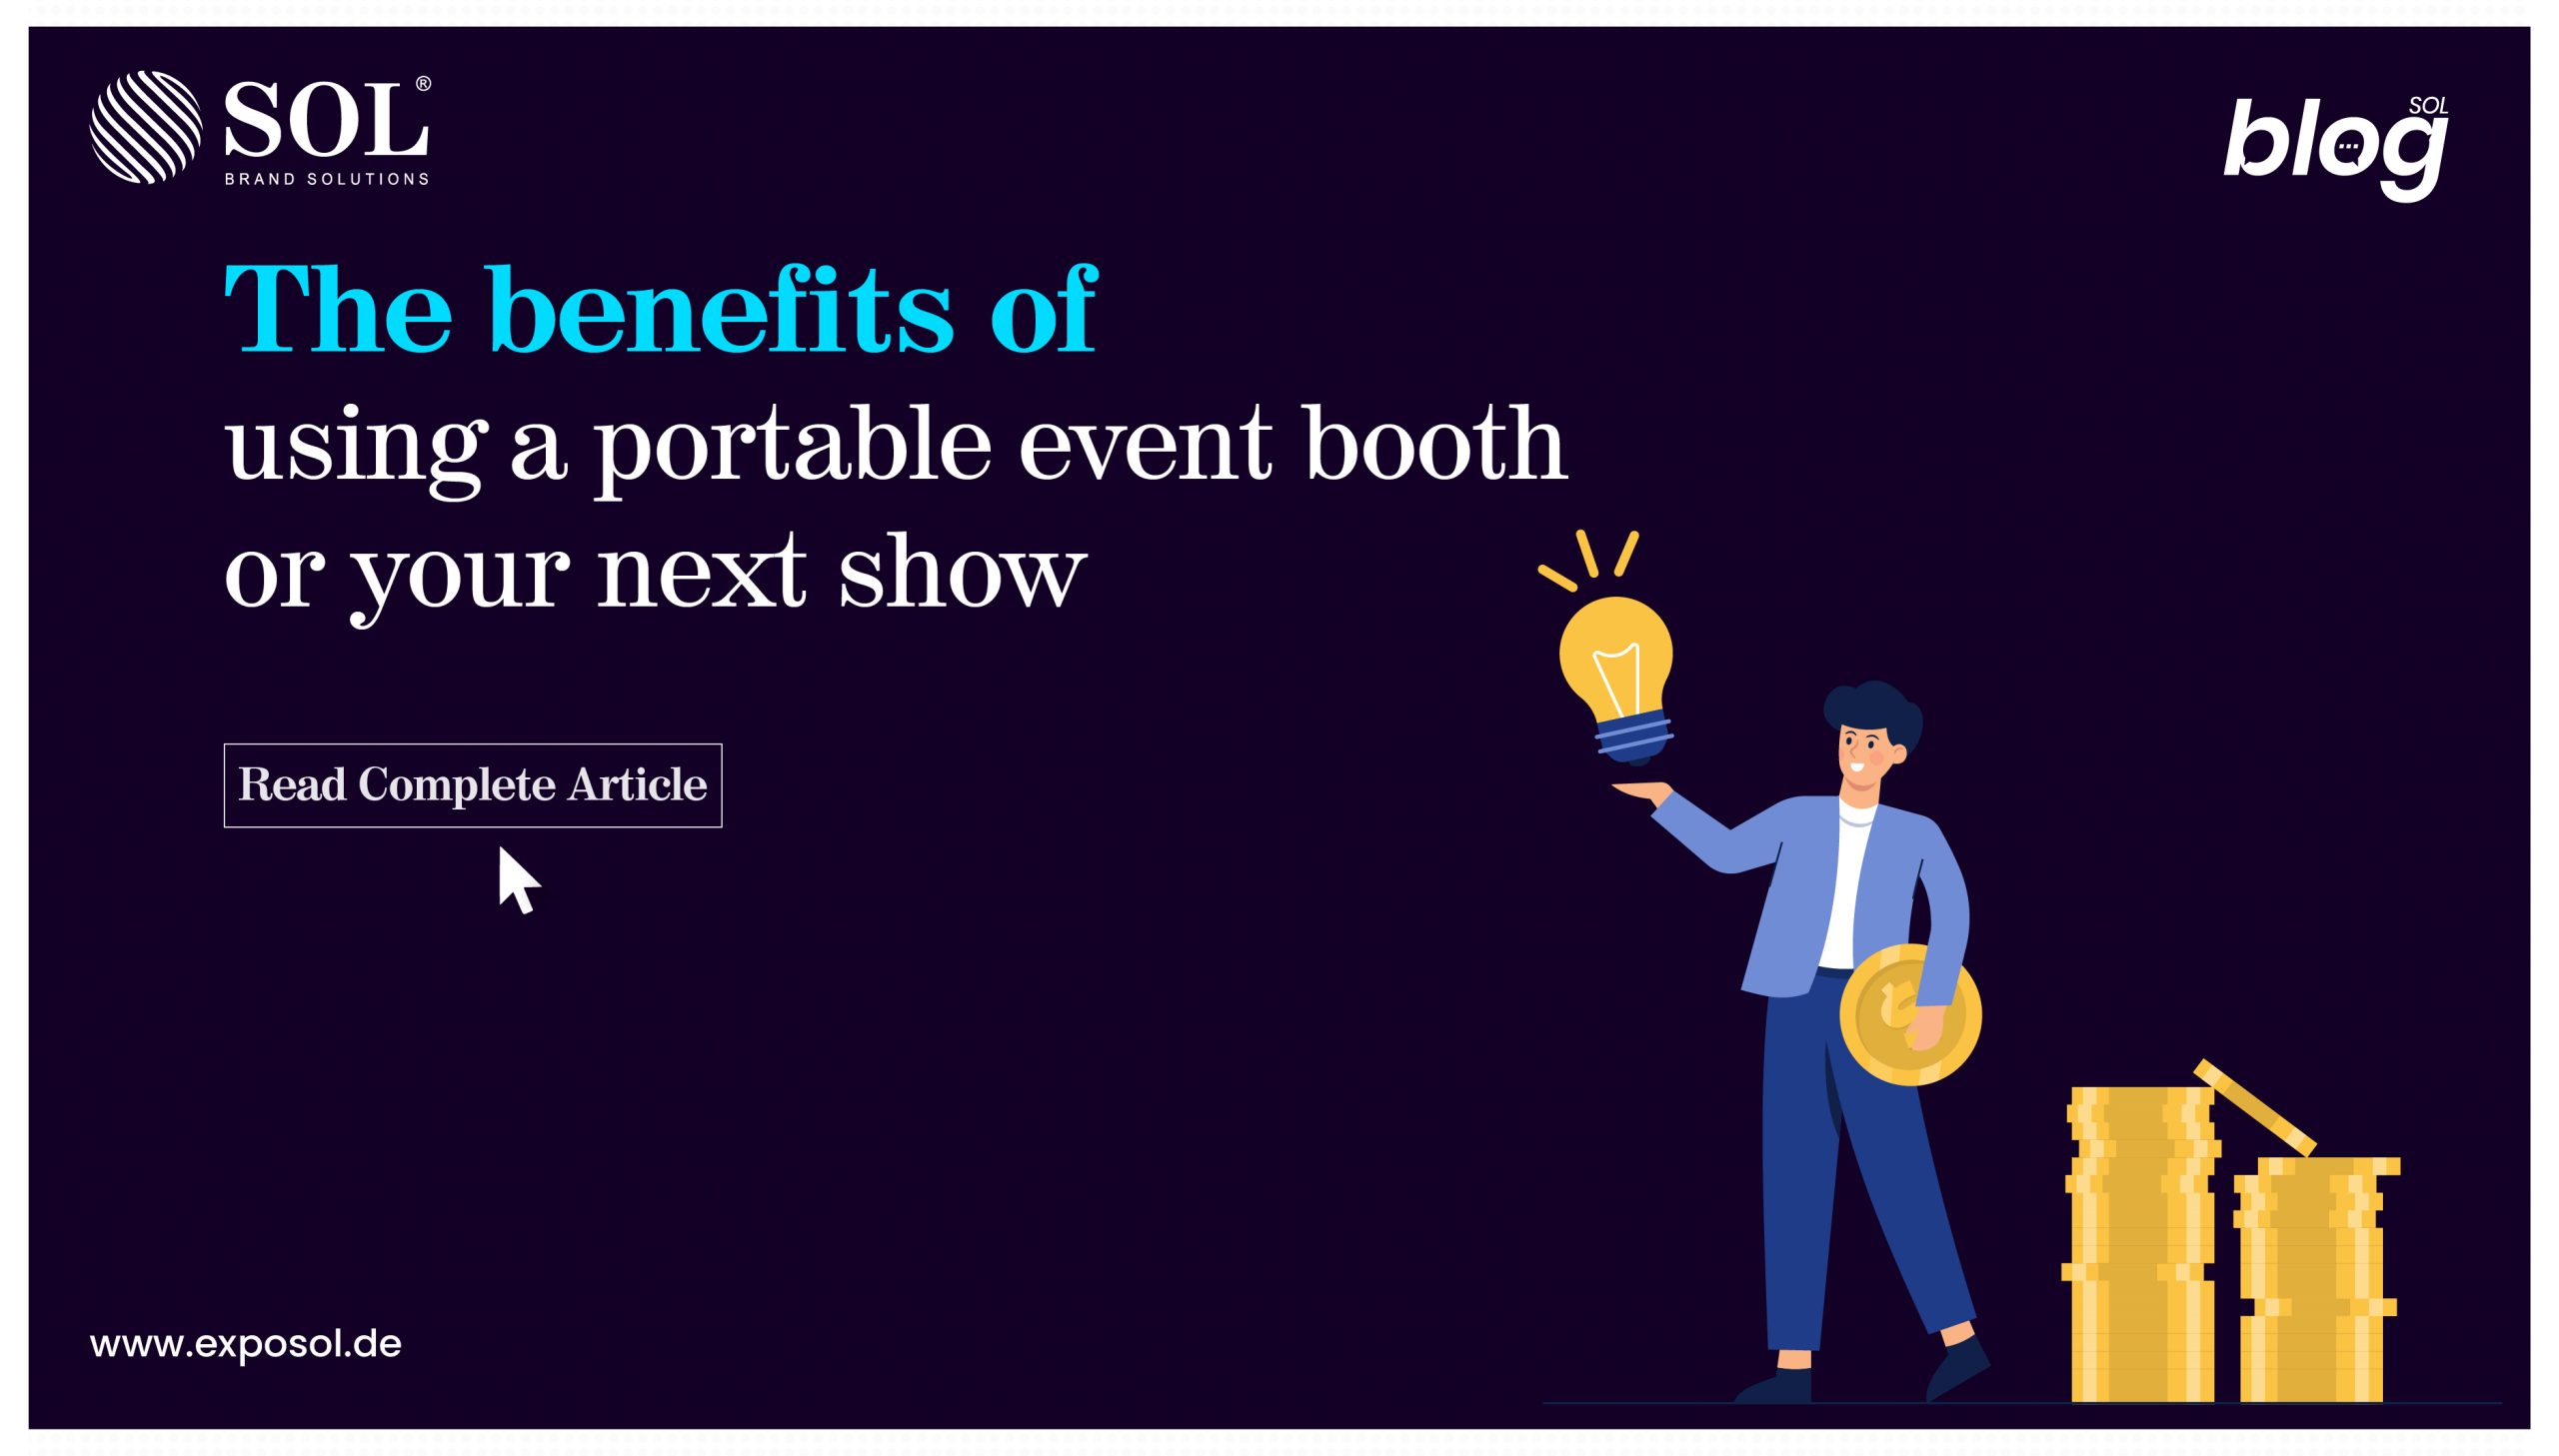 THE BENEFITS OF USING A PORTABLE EVENT BOOTH FOR YOUR NEXT SHOW